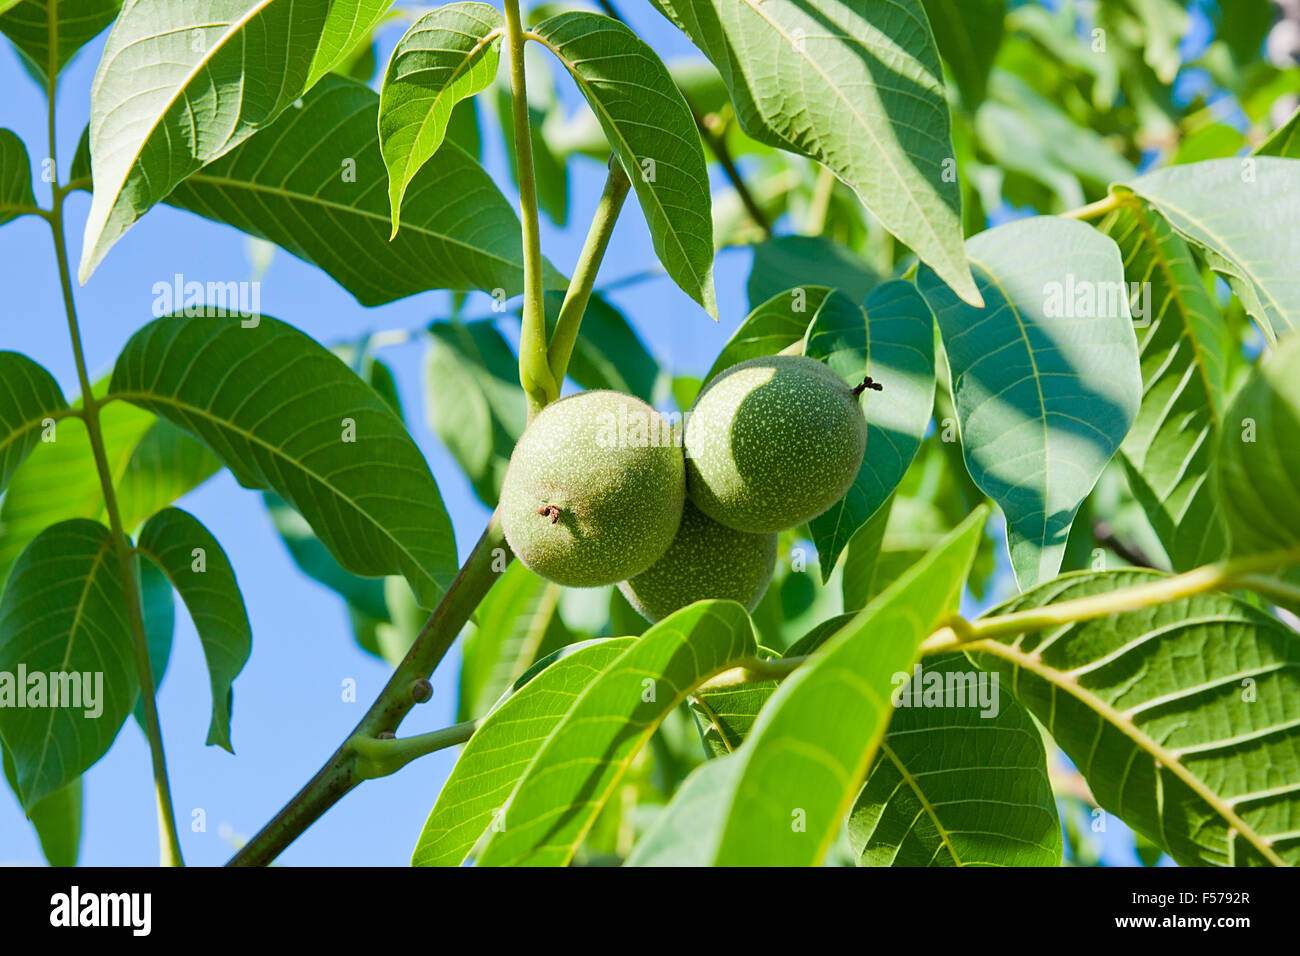 Green walnuts with green leaves on a tree branch. Stock Photo